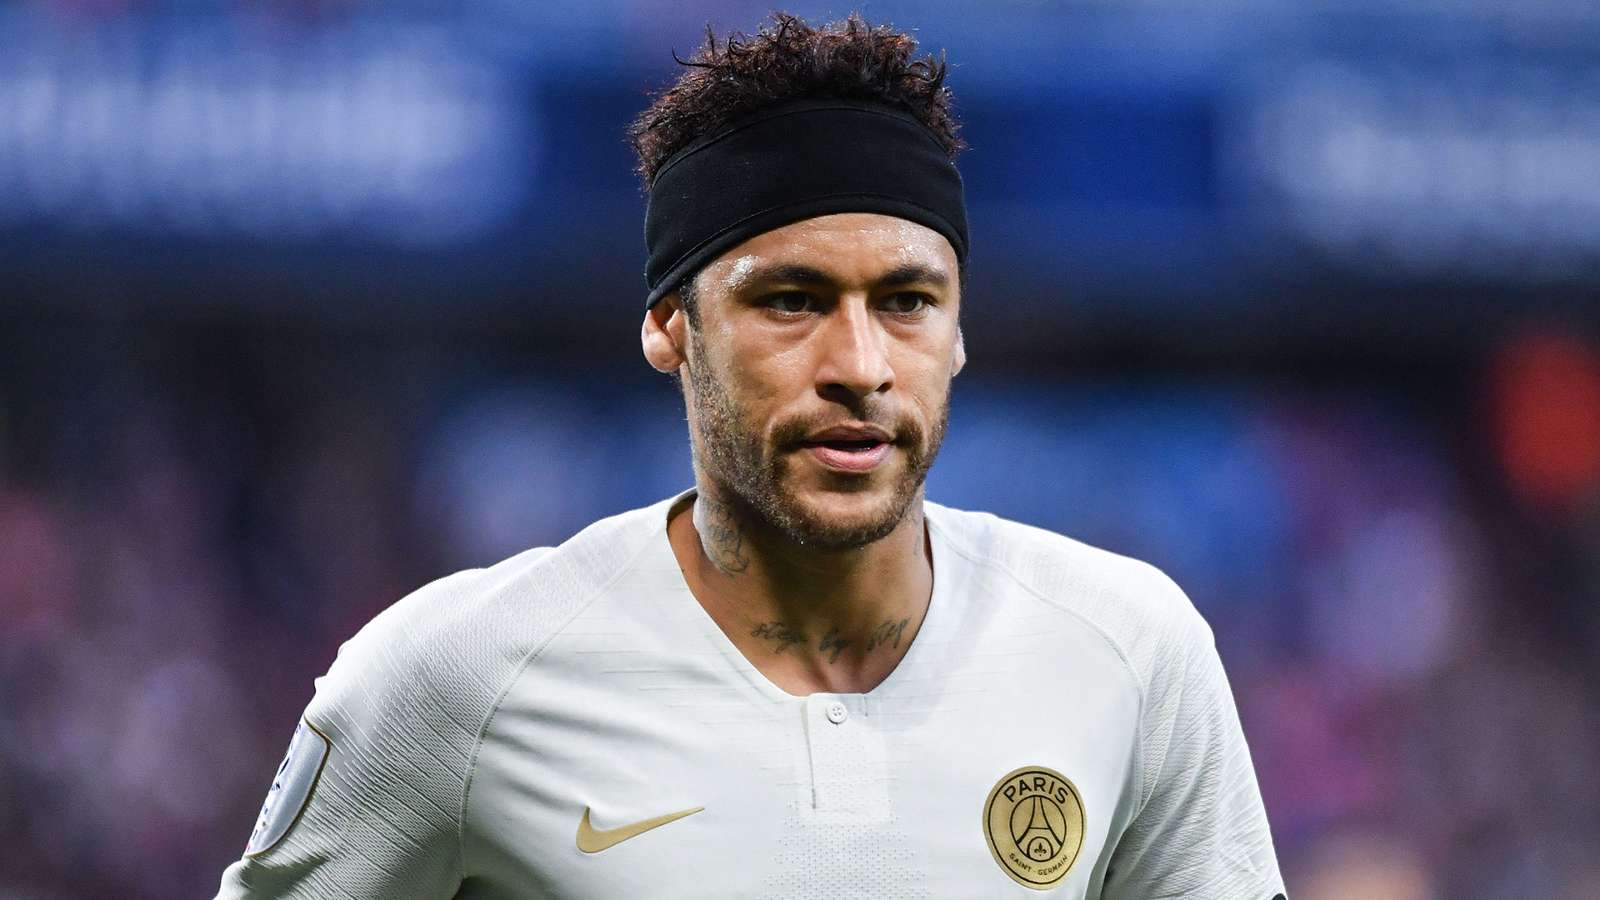 'Neymar can leave PSG' - Leonardo open to offers after 'superficial' Barcelona discussions - Bóng Đá